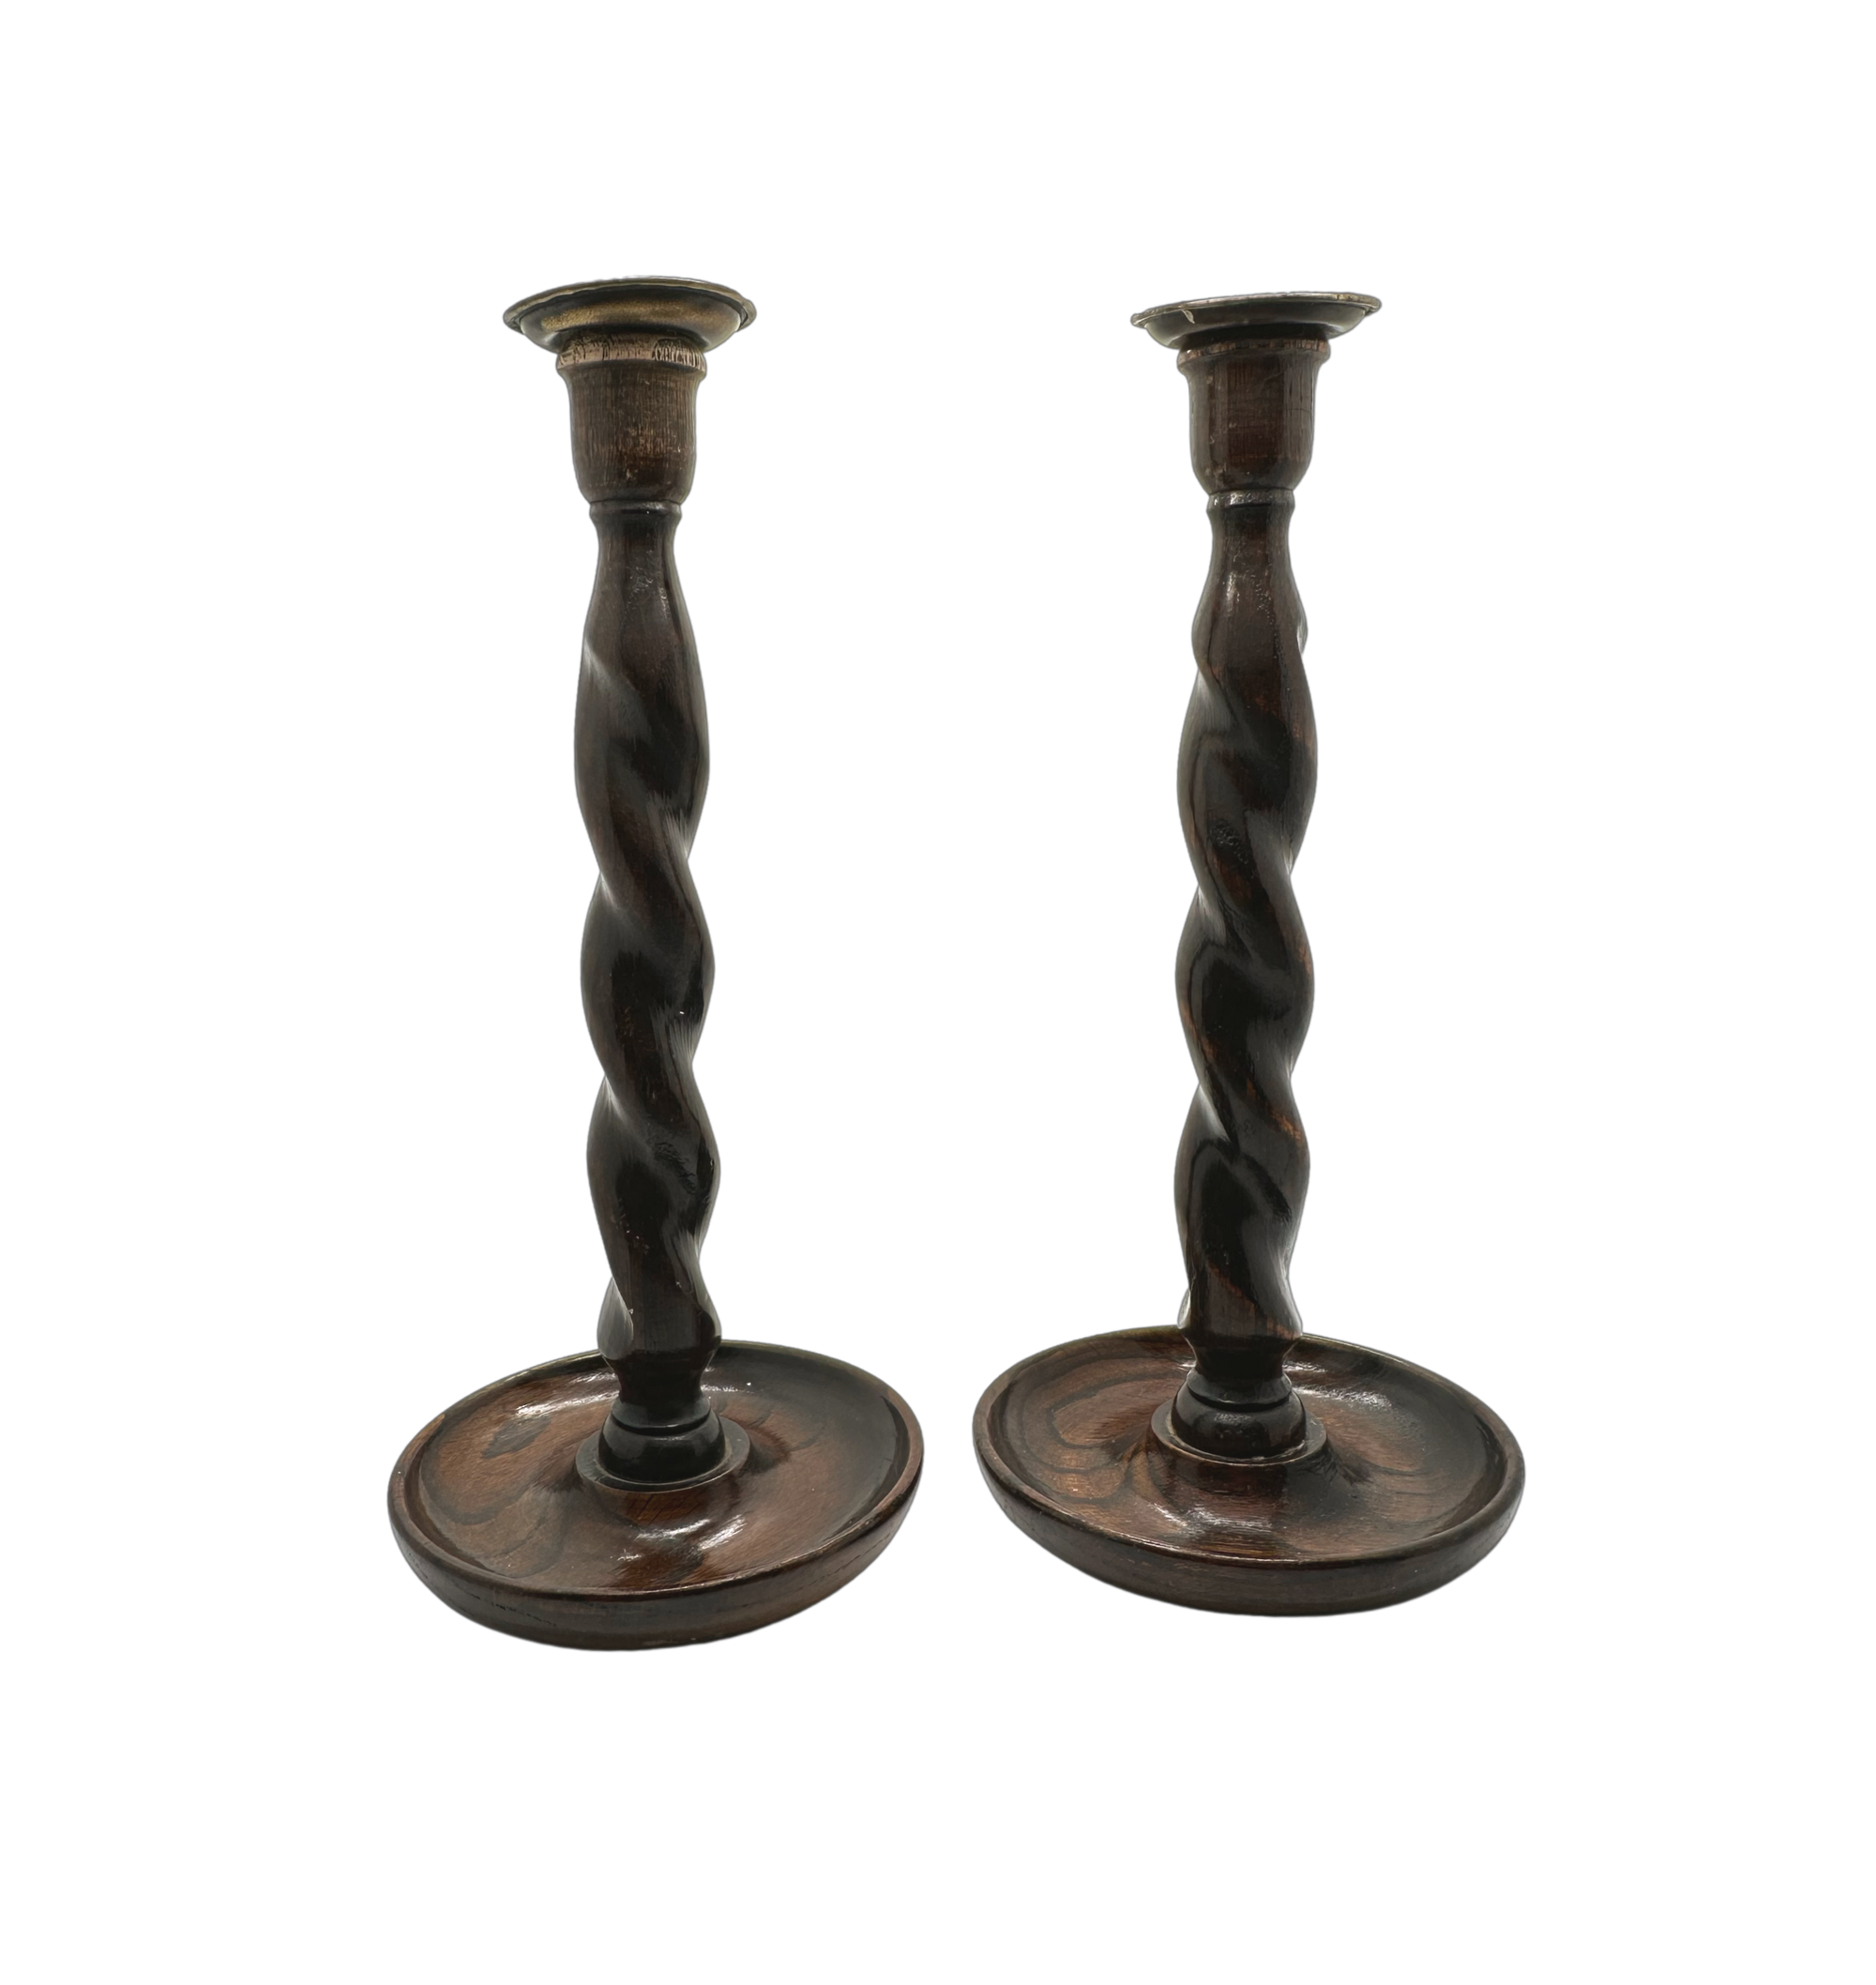 Pair of antique barley twist candlesticks with brass cap tops